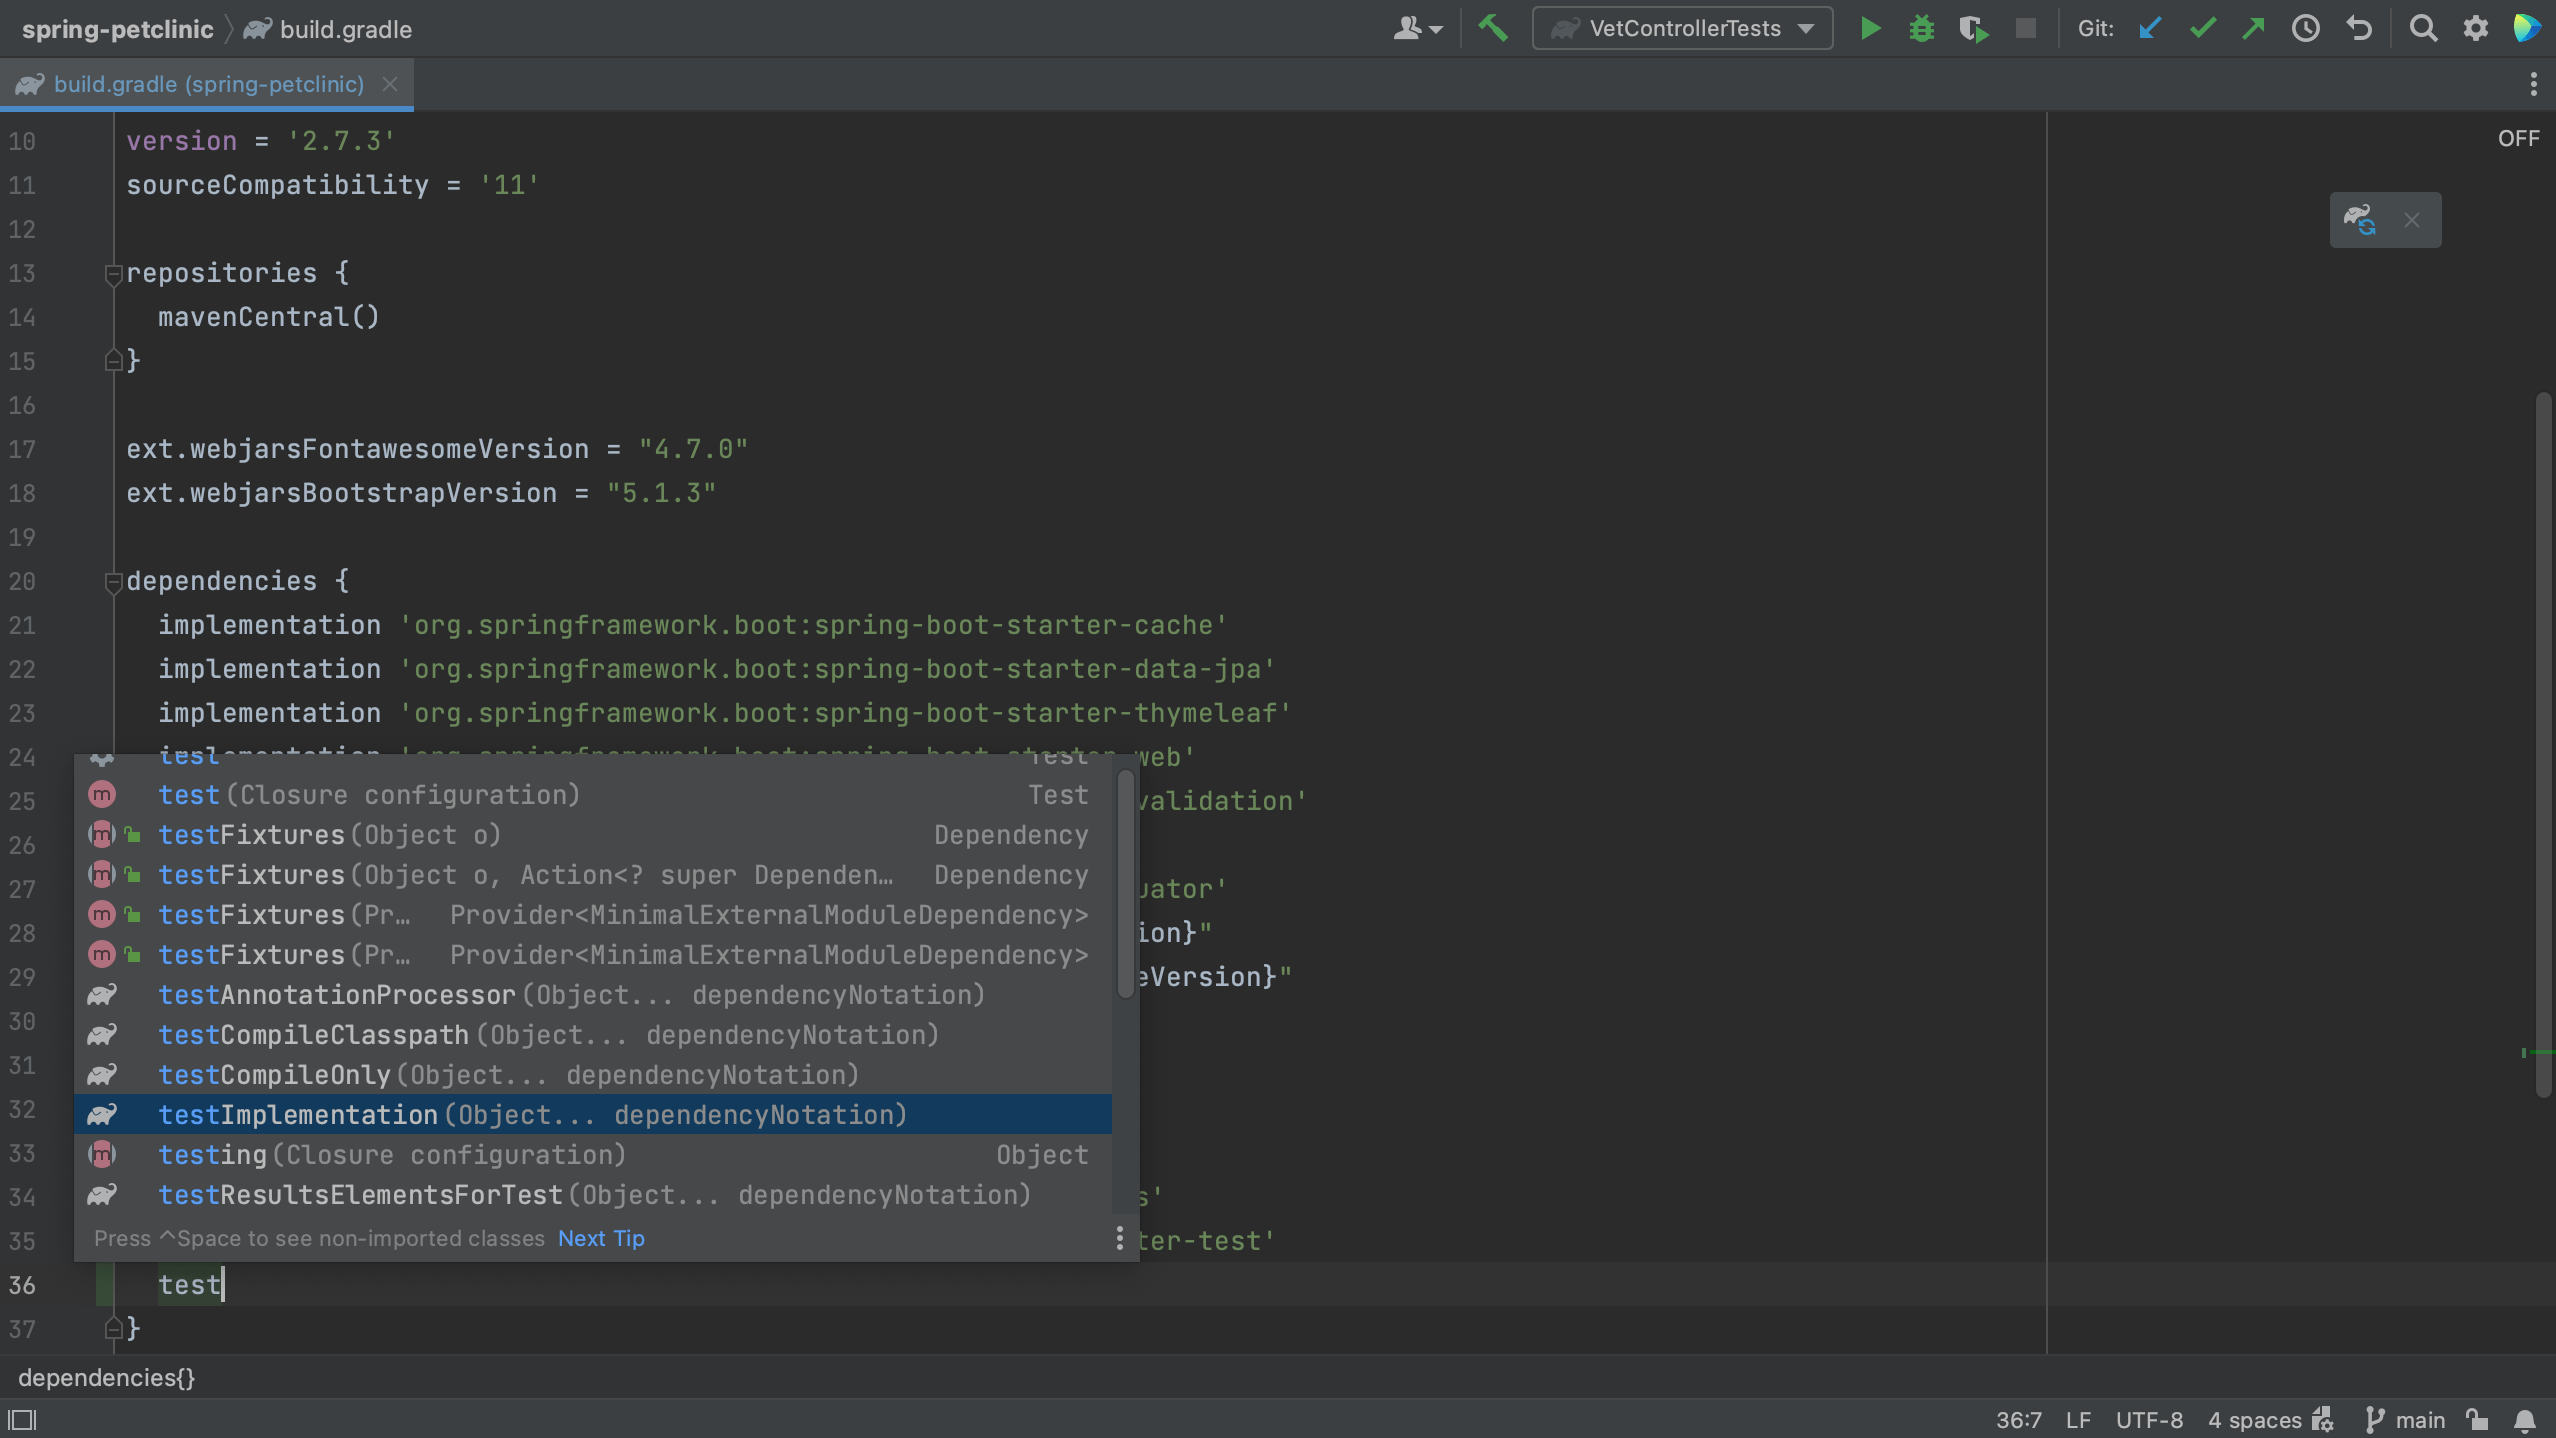 Code completion in build.gradle